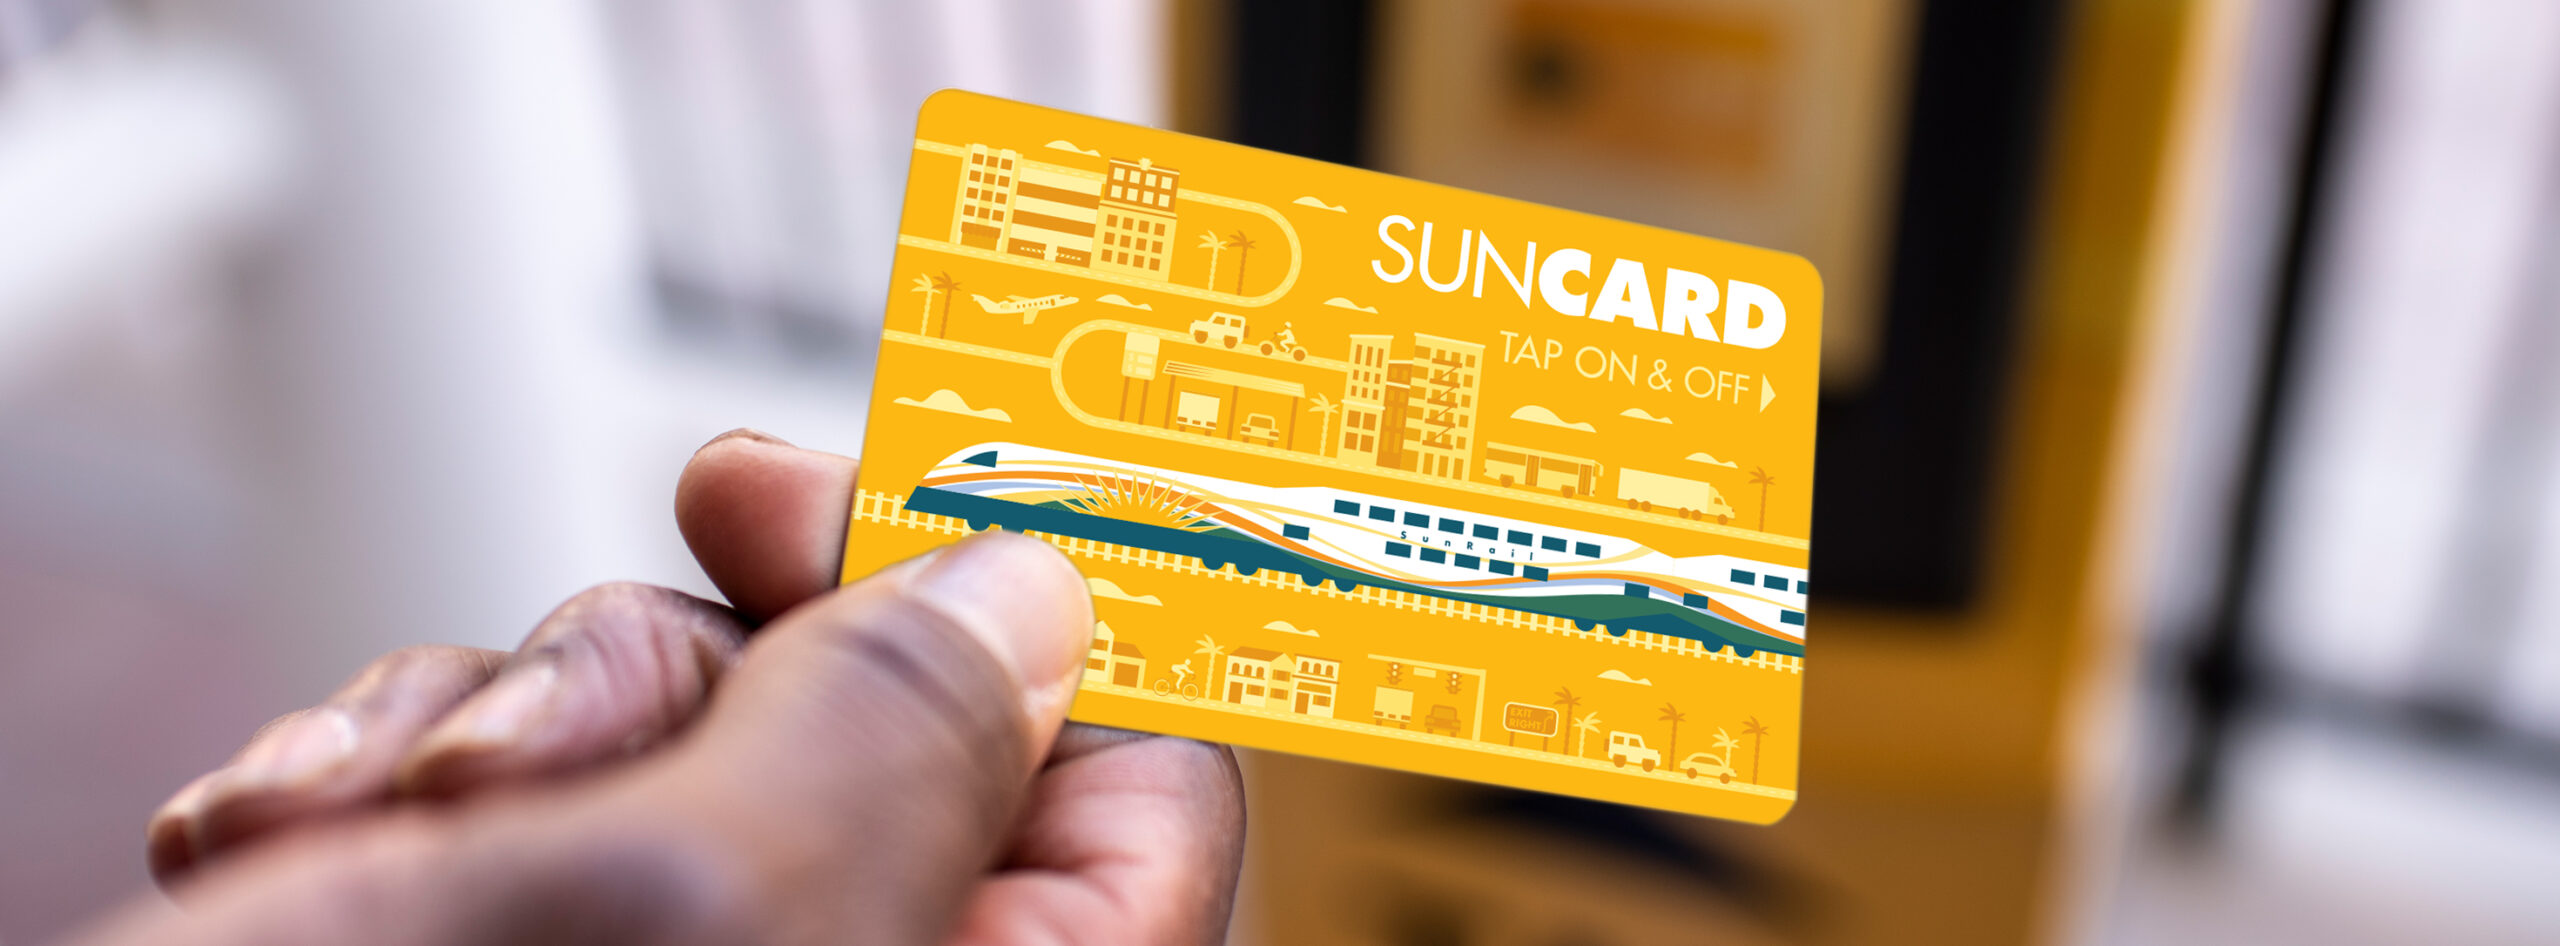 Masthead image - Person tapping on at a TVU with their SunCard.